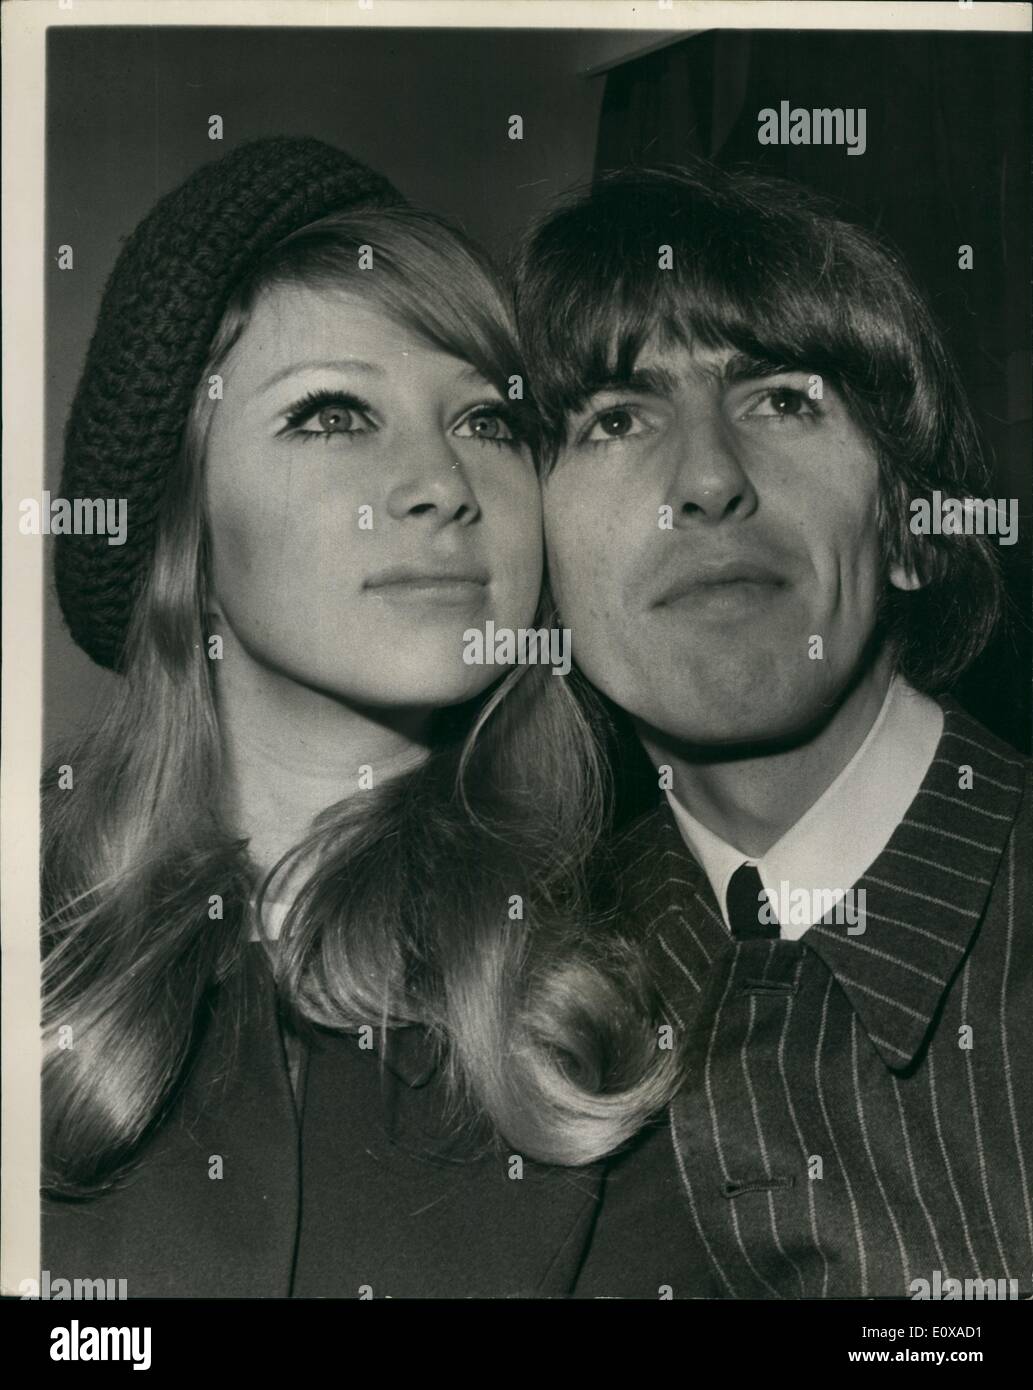 Jan. 01, 1966 - Beatle George Harrison And His Bride Of One Day Hold ...